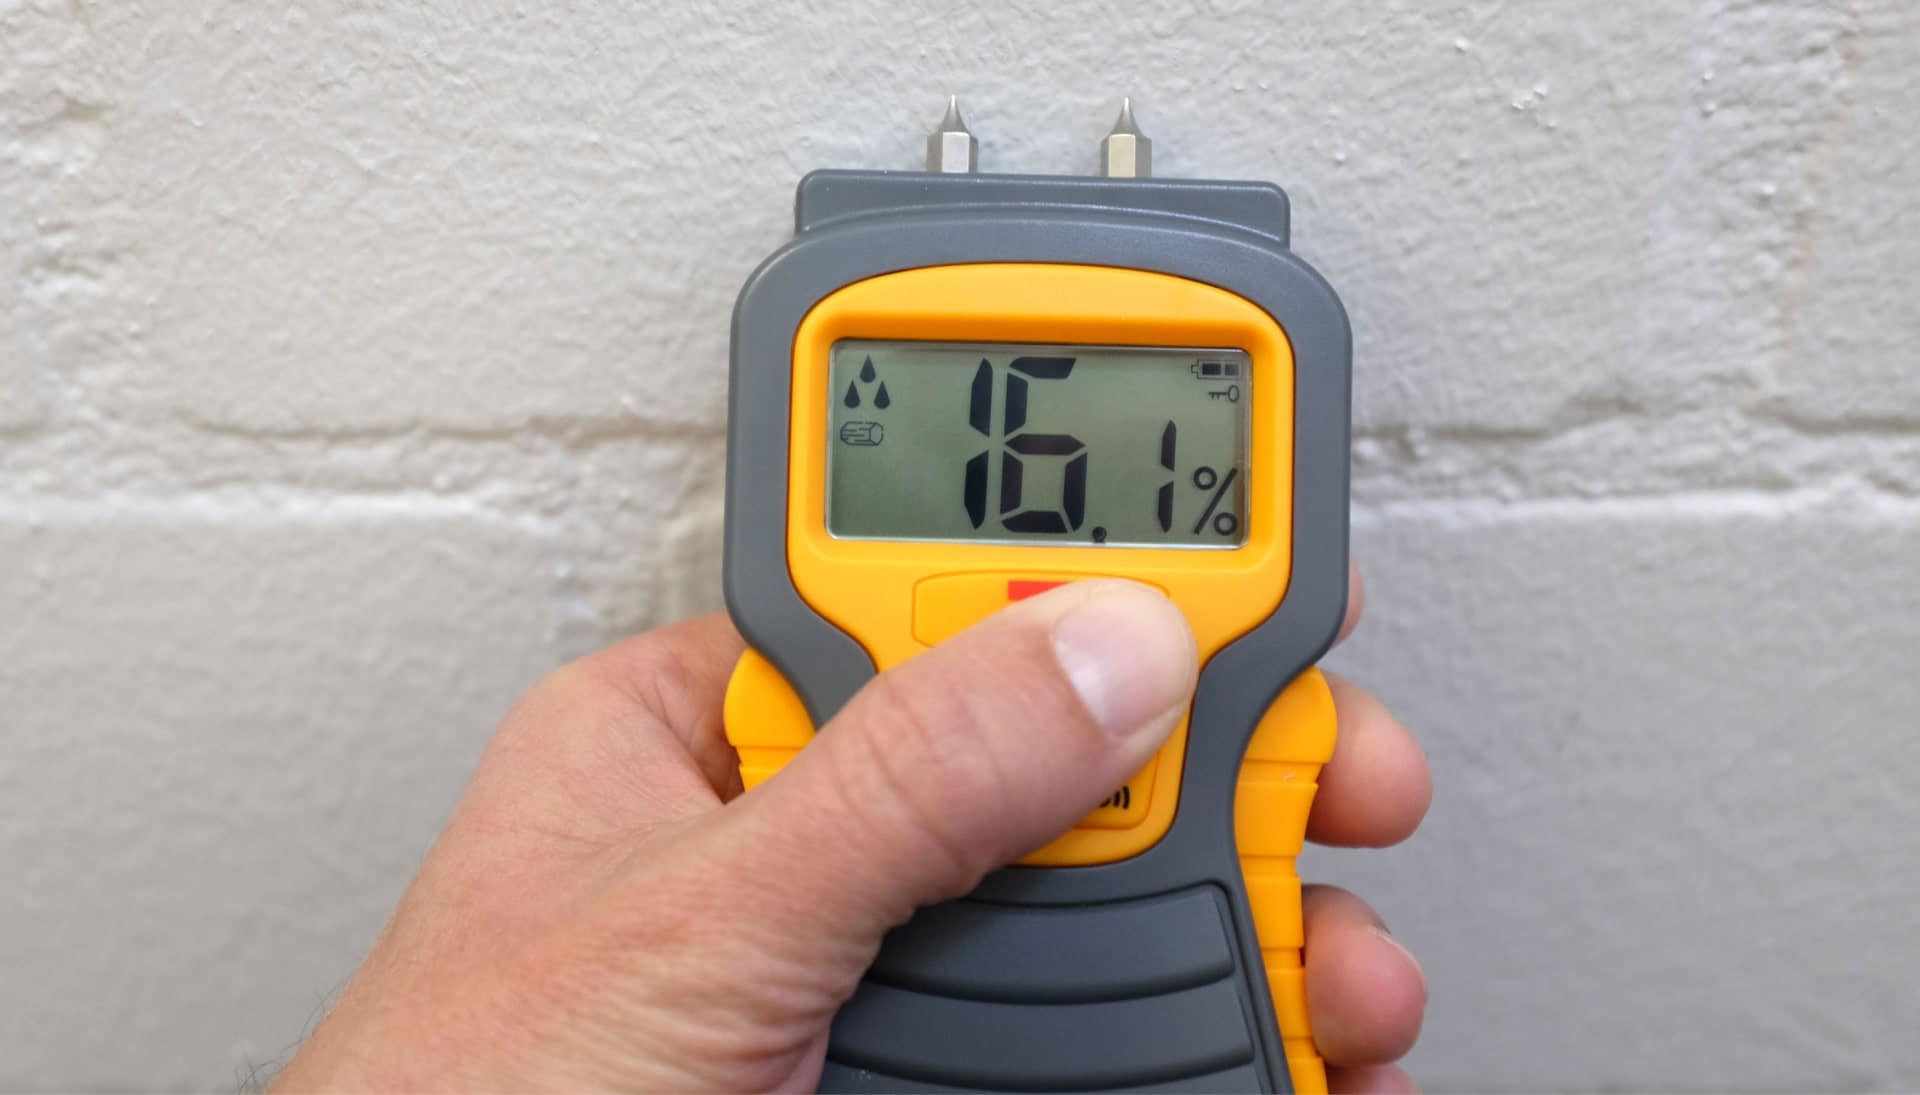 We provide fast, accurate, and affordable mold testing services in Gilbert, Arizona.